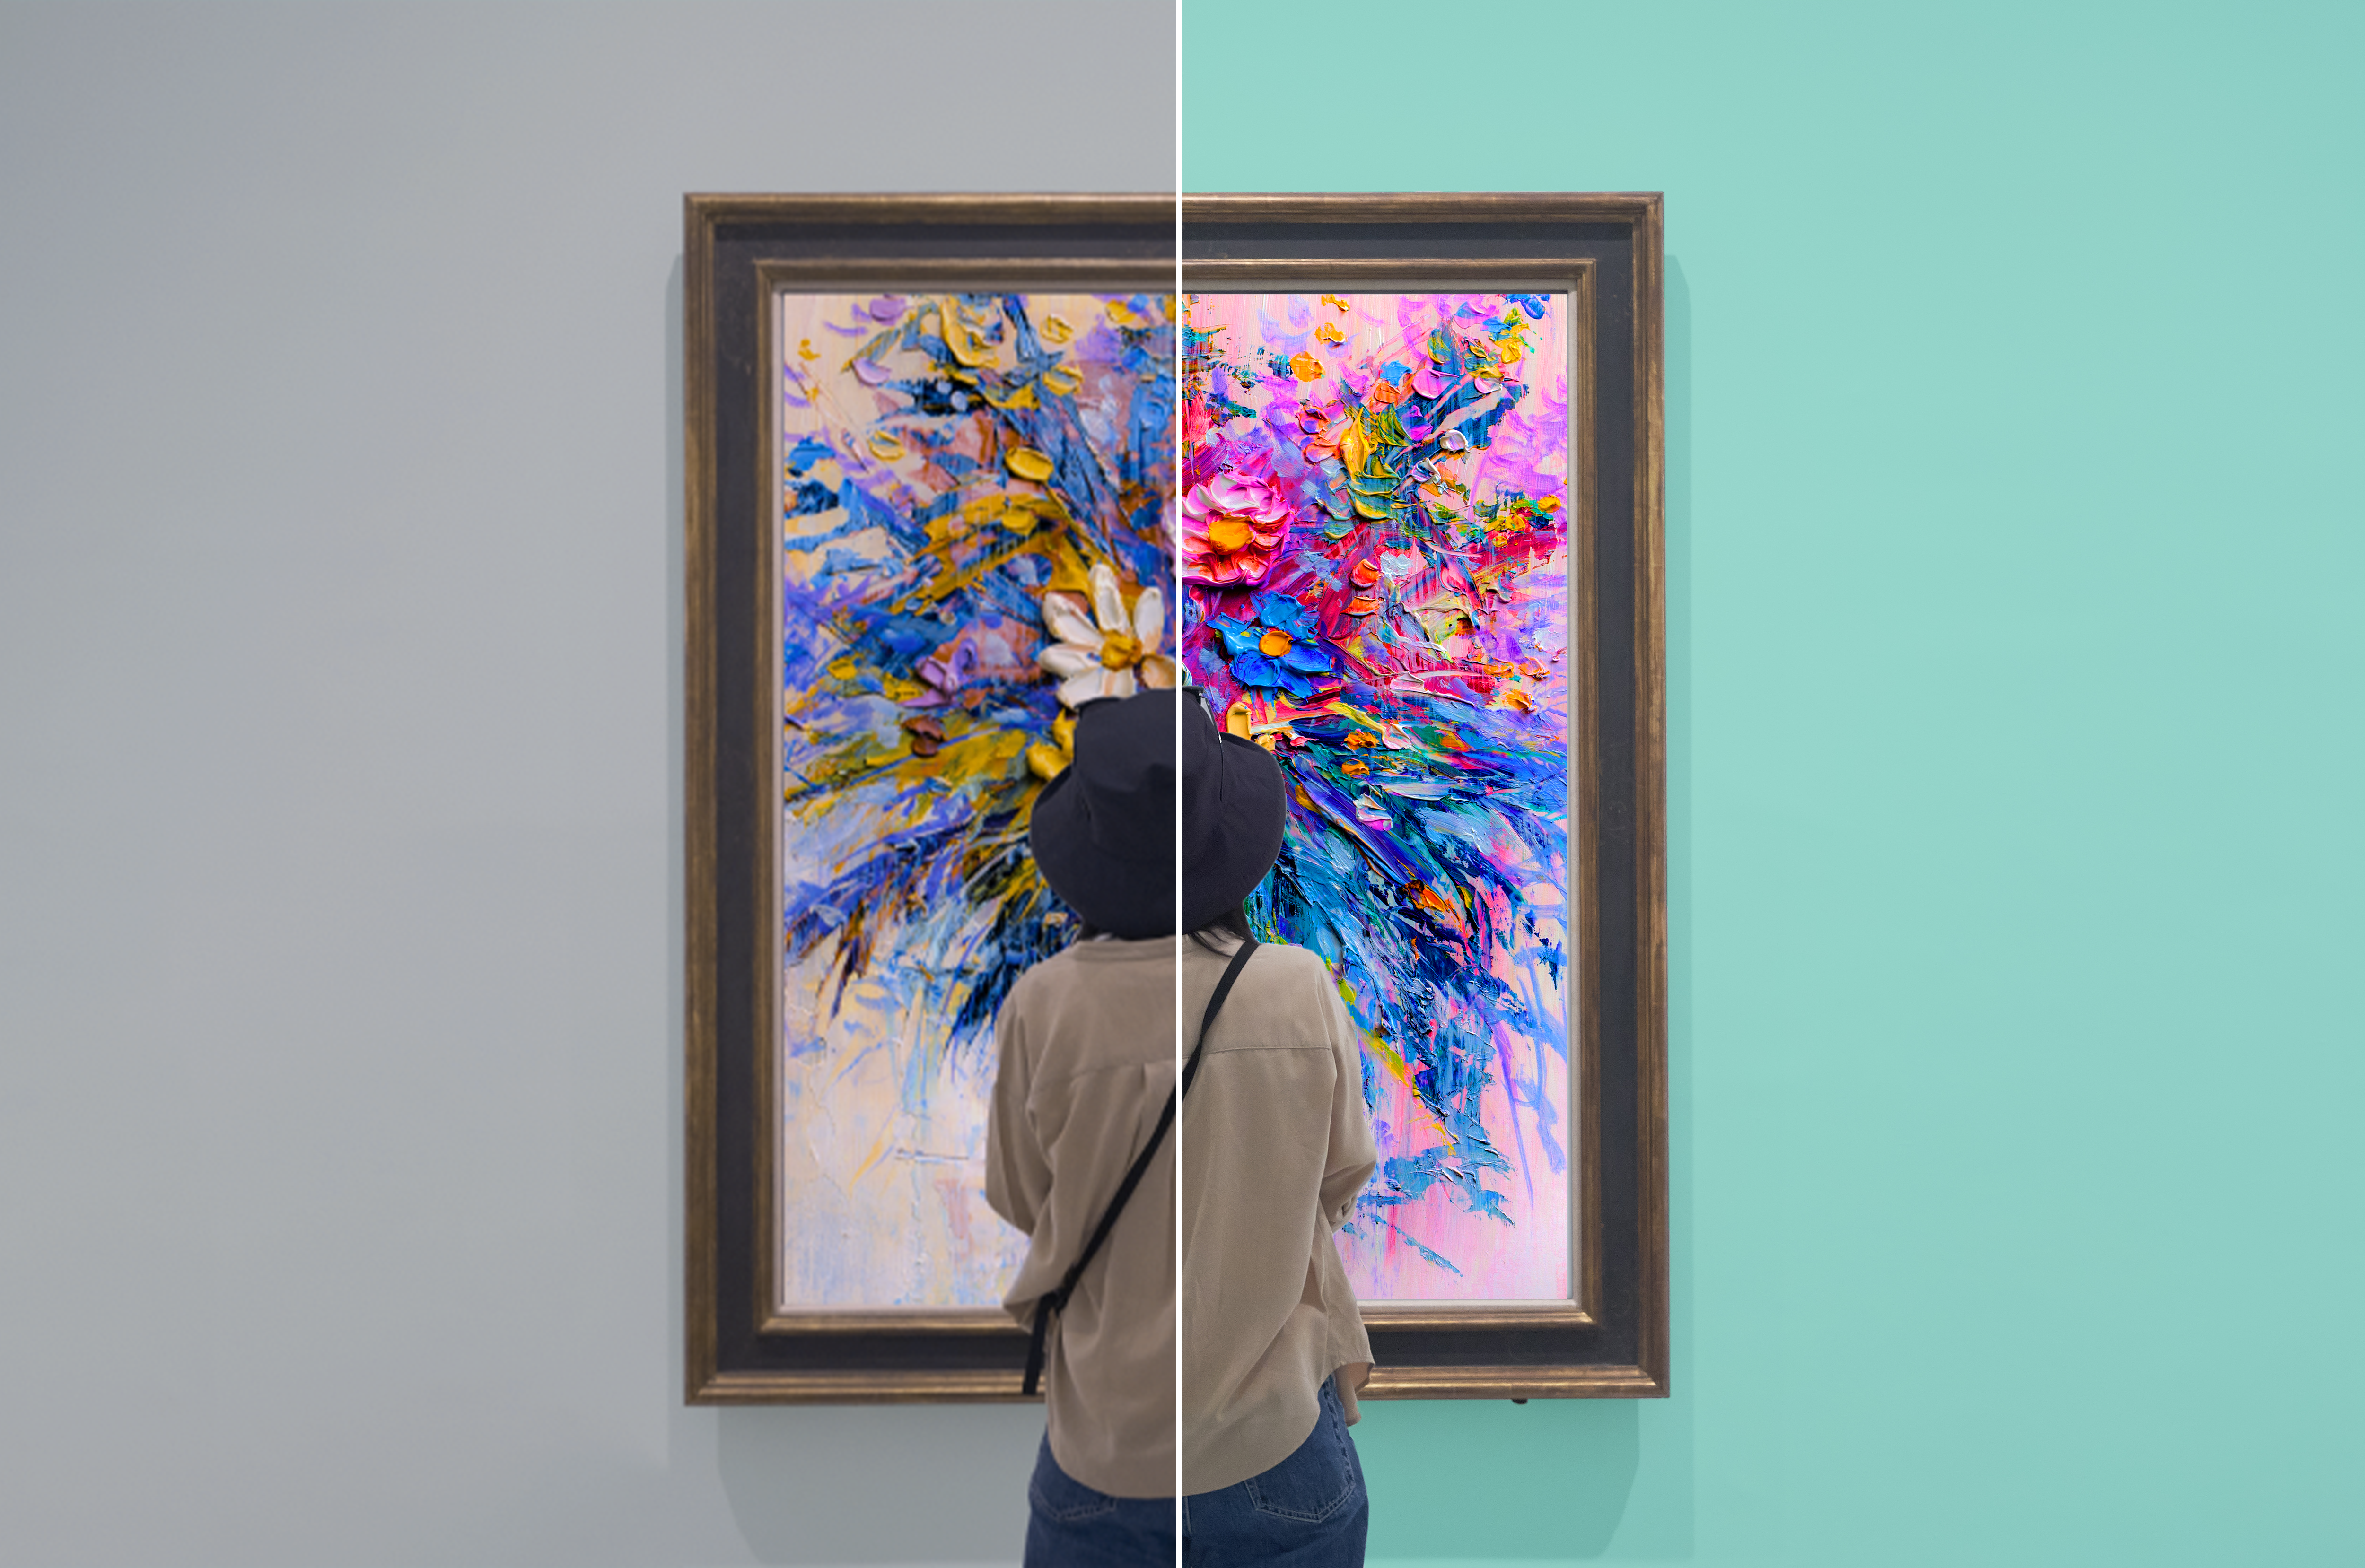 Study Finds Visits to Museums and Colorful Attractions Less Appealing for Color Blind People